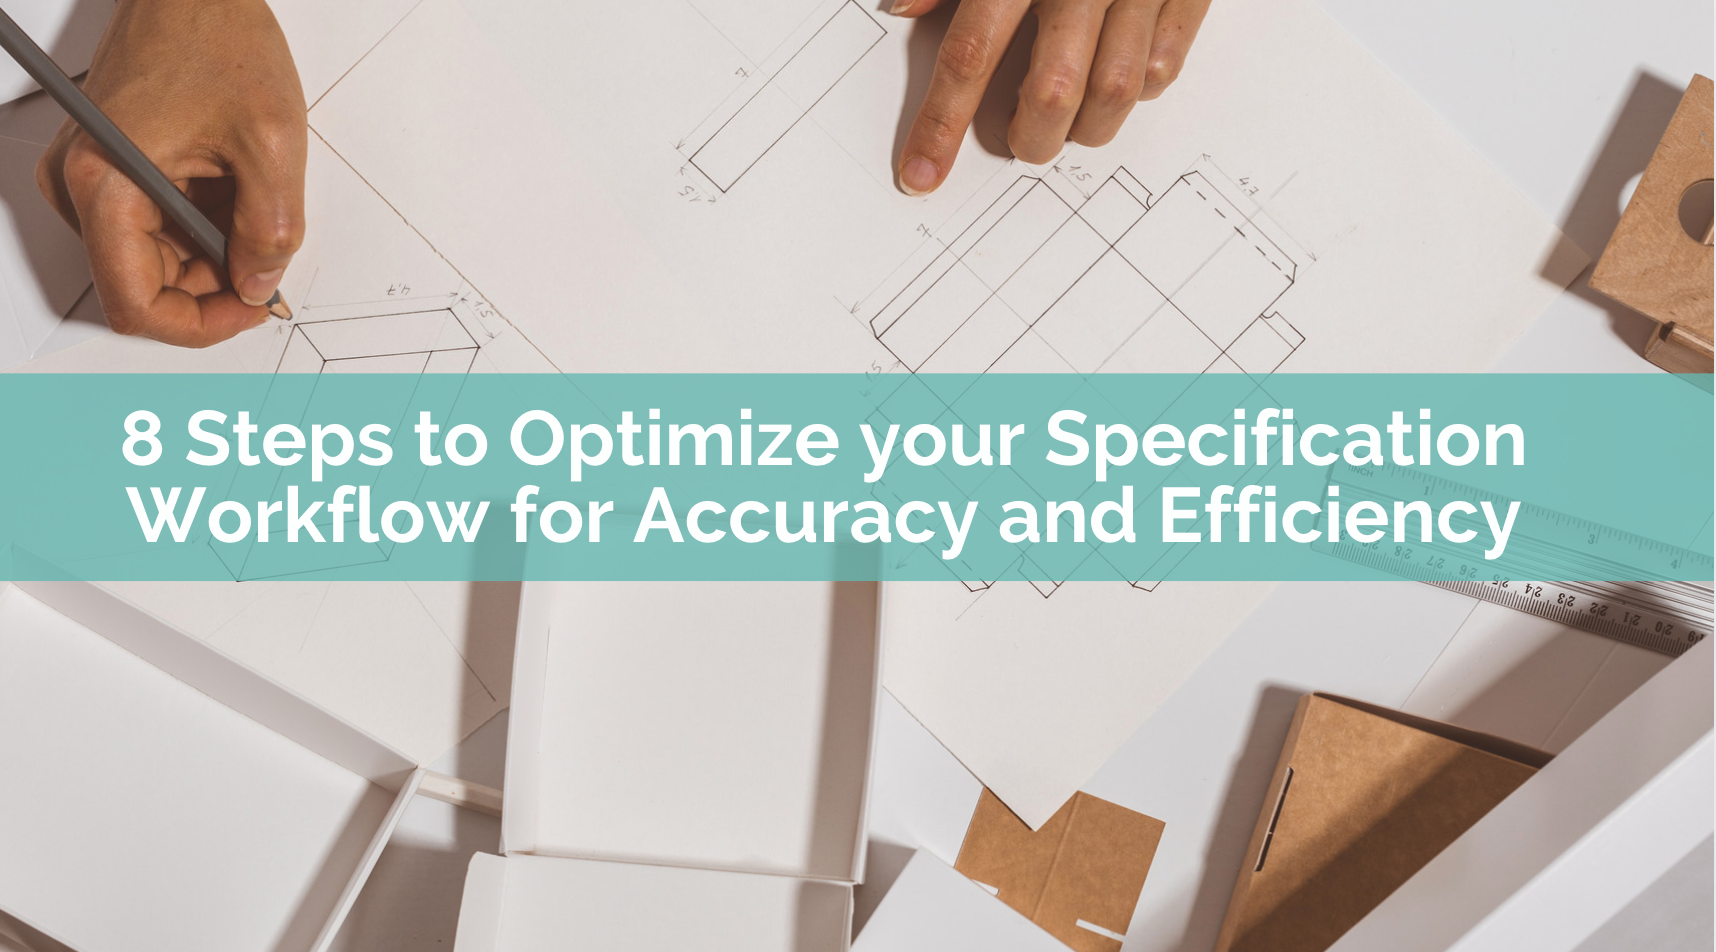 8 Steps to Optimize Your Specification Workflow for Accuracy and Efficiency